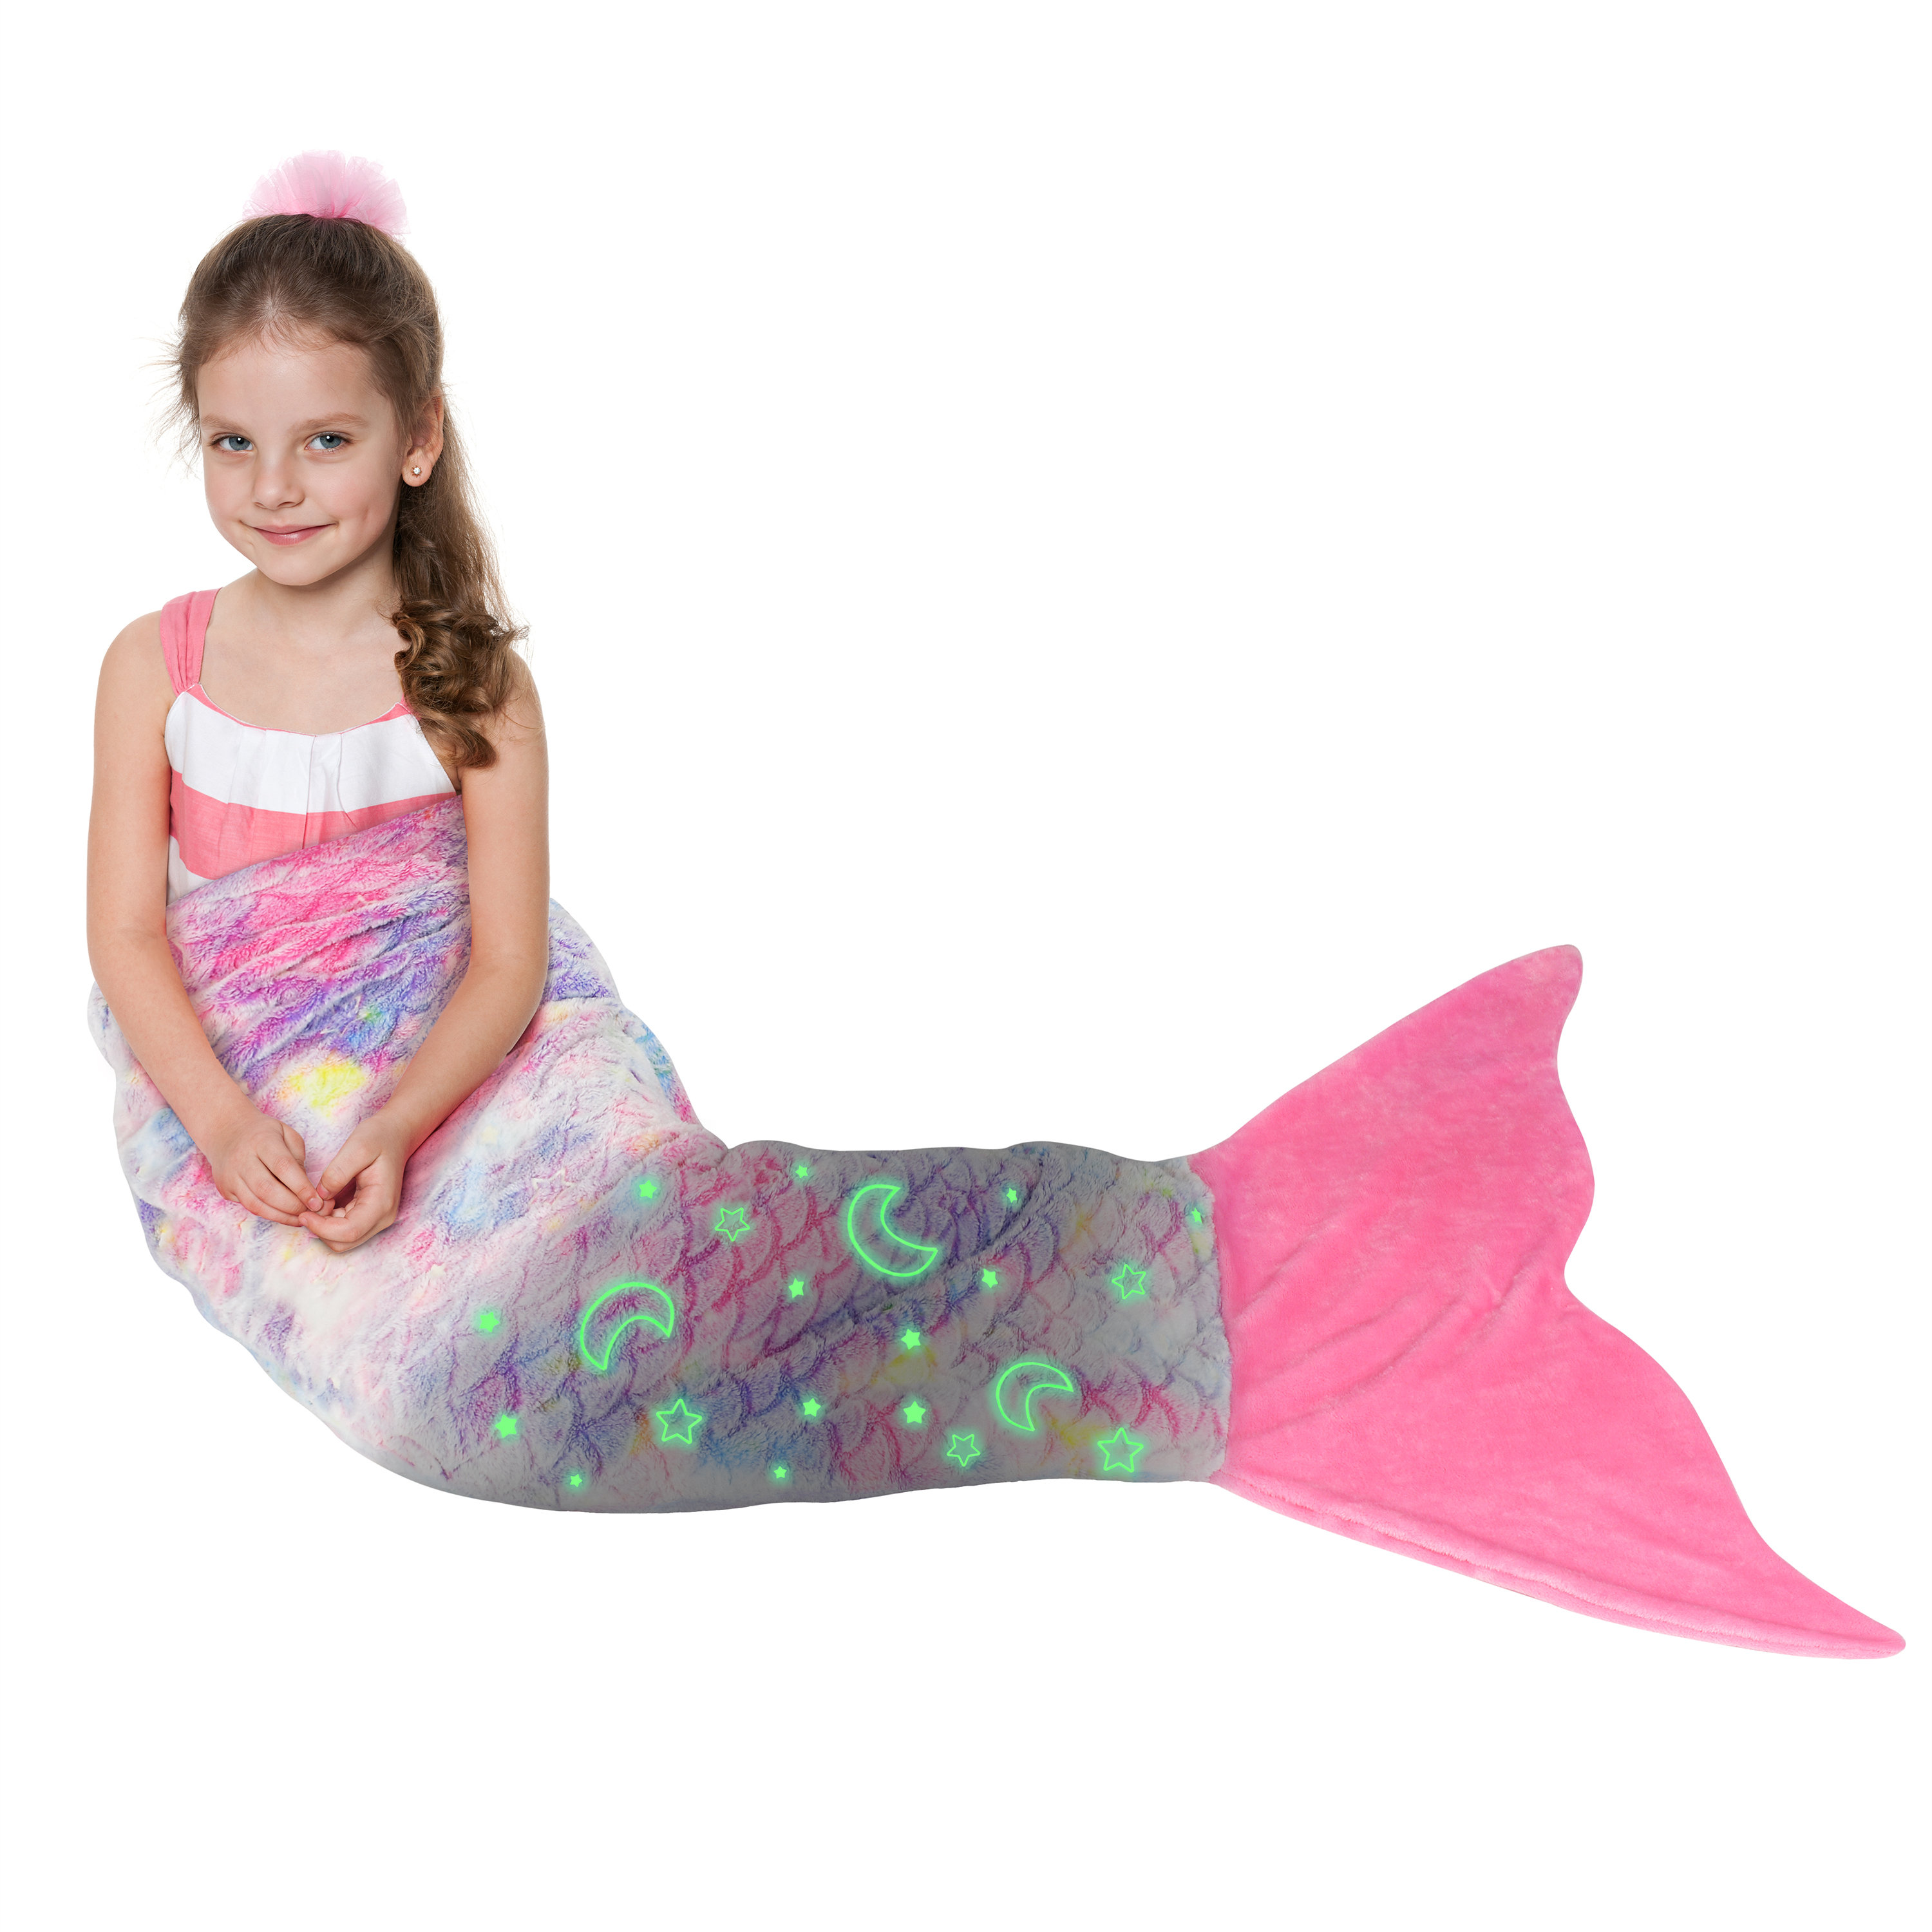 Magical Holiday Gifts Ideas for Girls (Mermaids & Unicorns